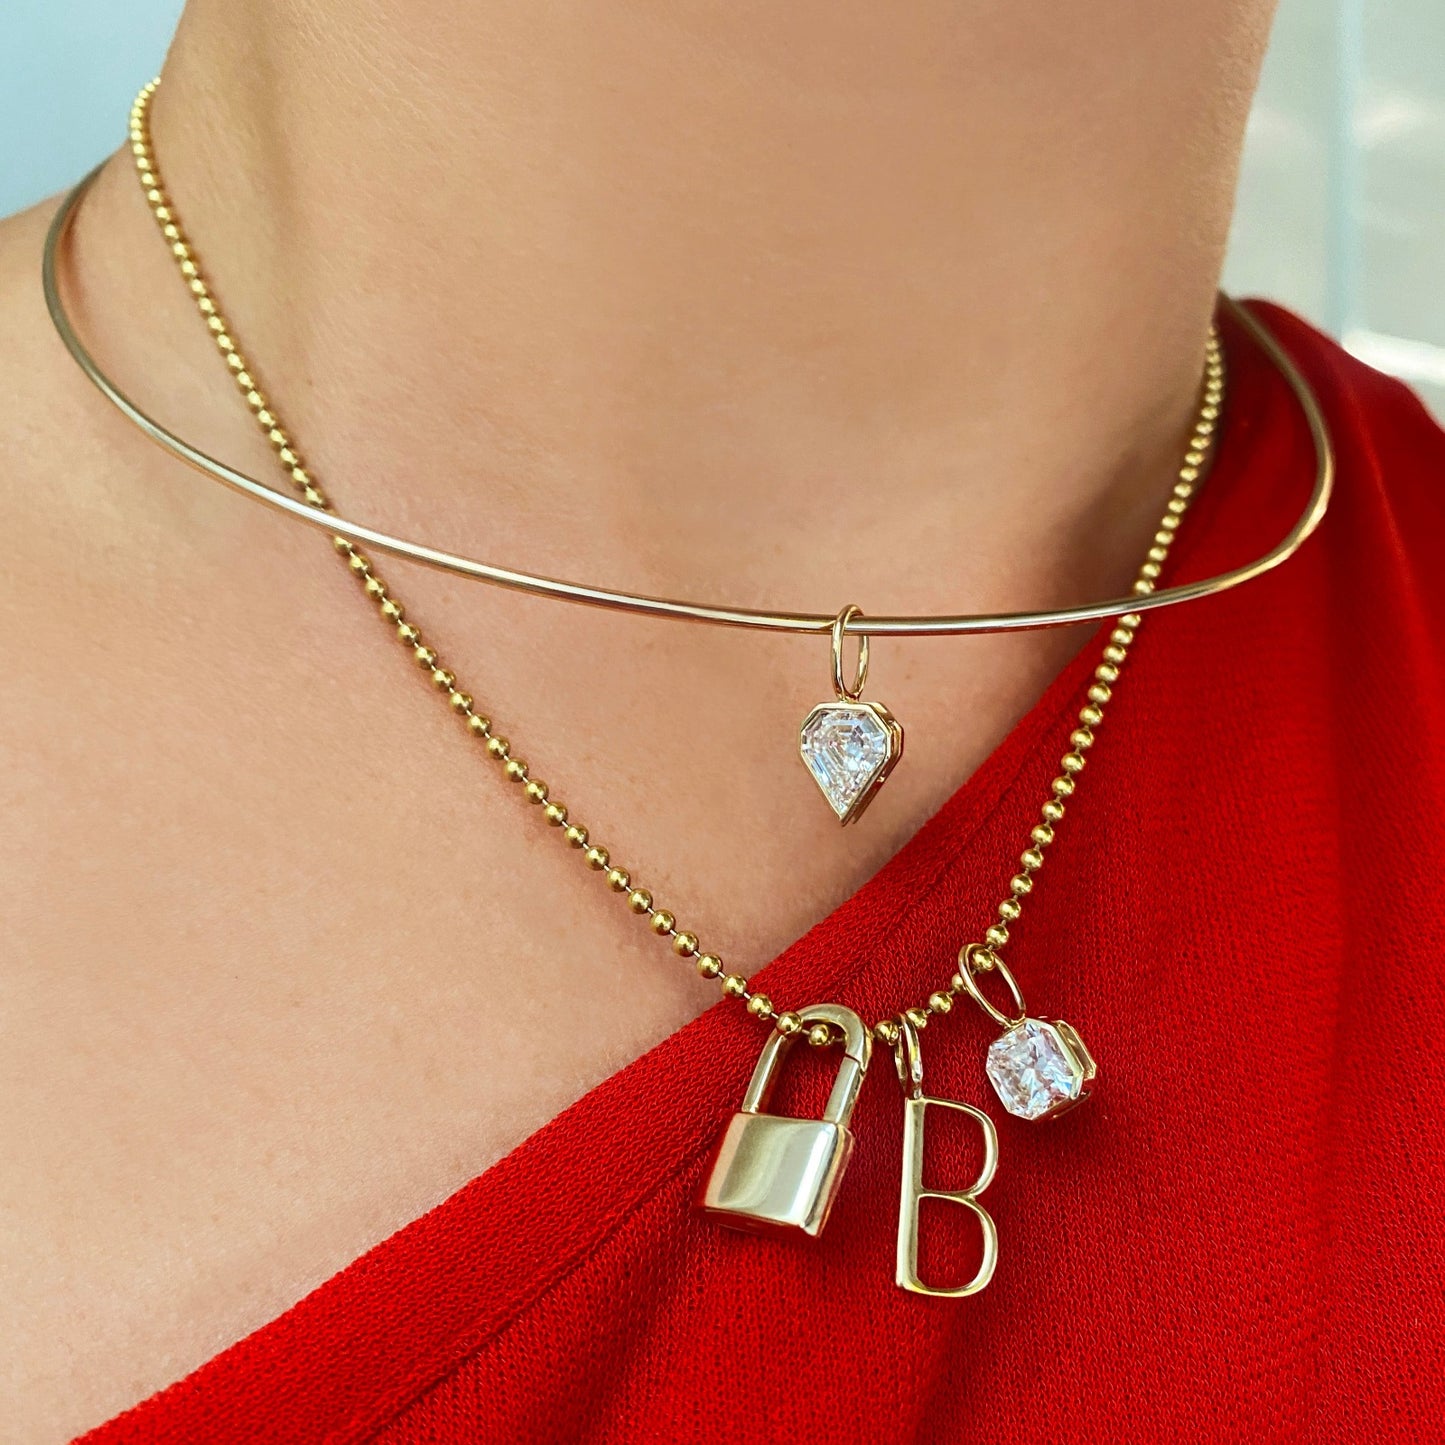 14k gold Aquila Cut Diamond Solitaire Charm. Styled on a neck with a padlock and B letter charm hanging from a bead chain necklace.